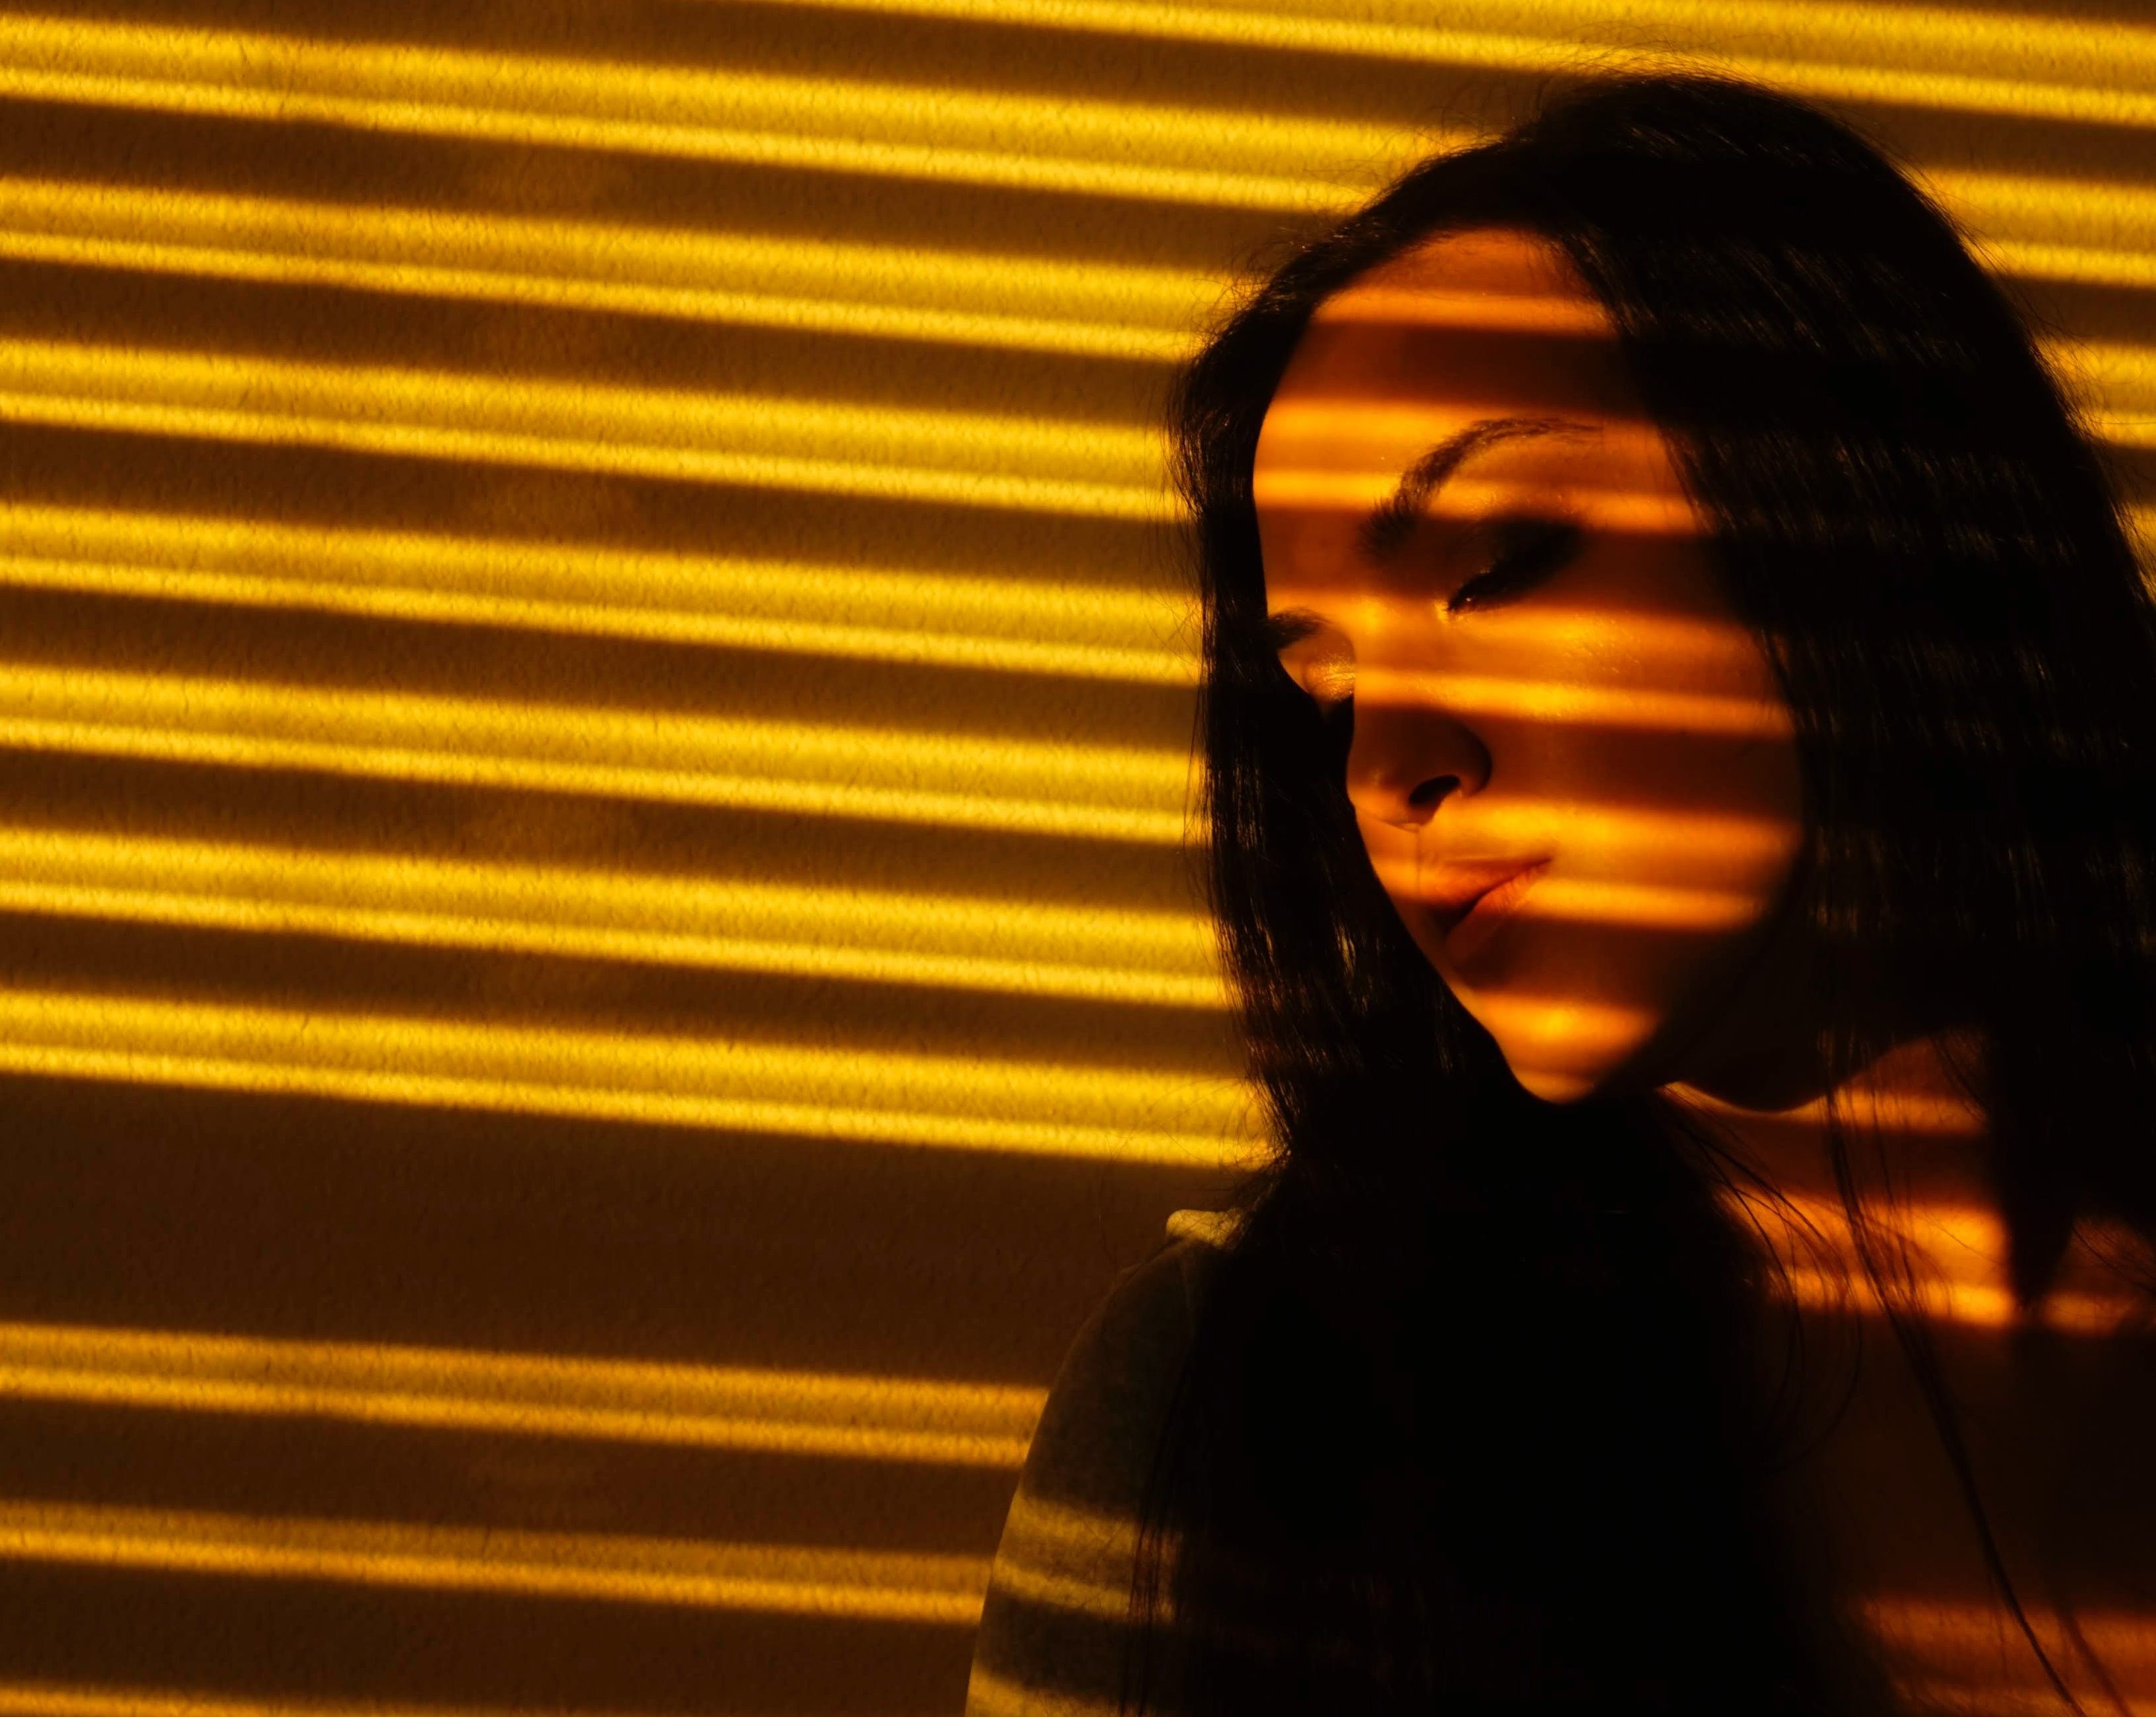 Profile of a woman reflected in the shadow of the blinds